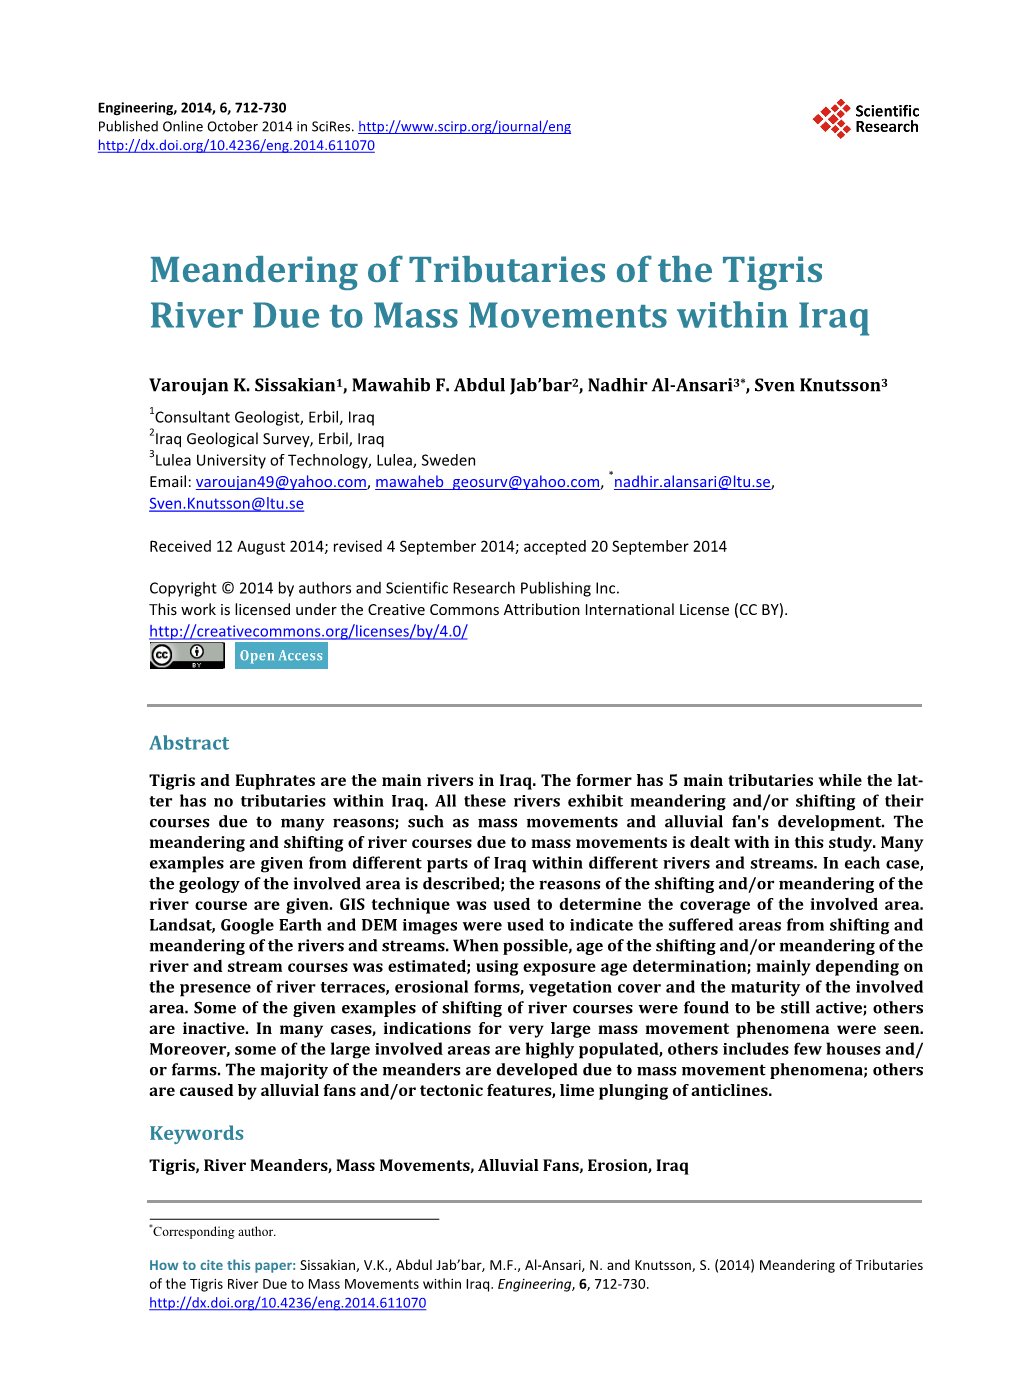 Meandering of Tributaries of the Tigris River Due to Mass Movements Within Iraq